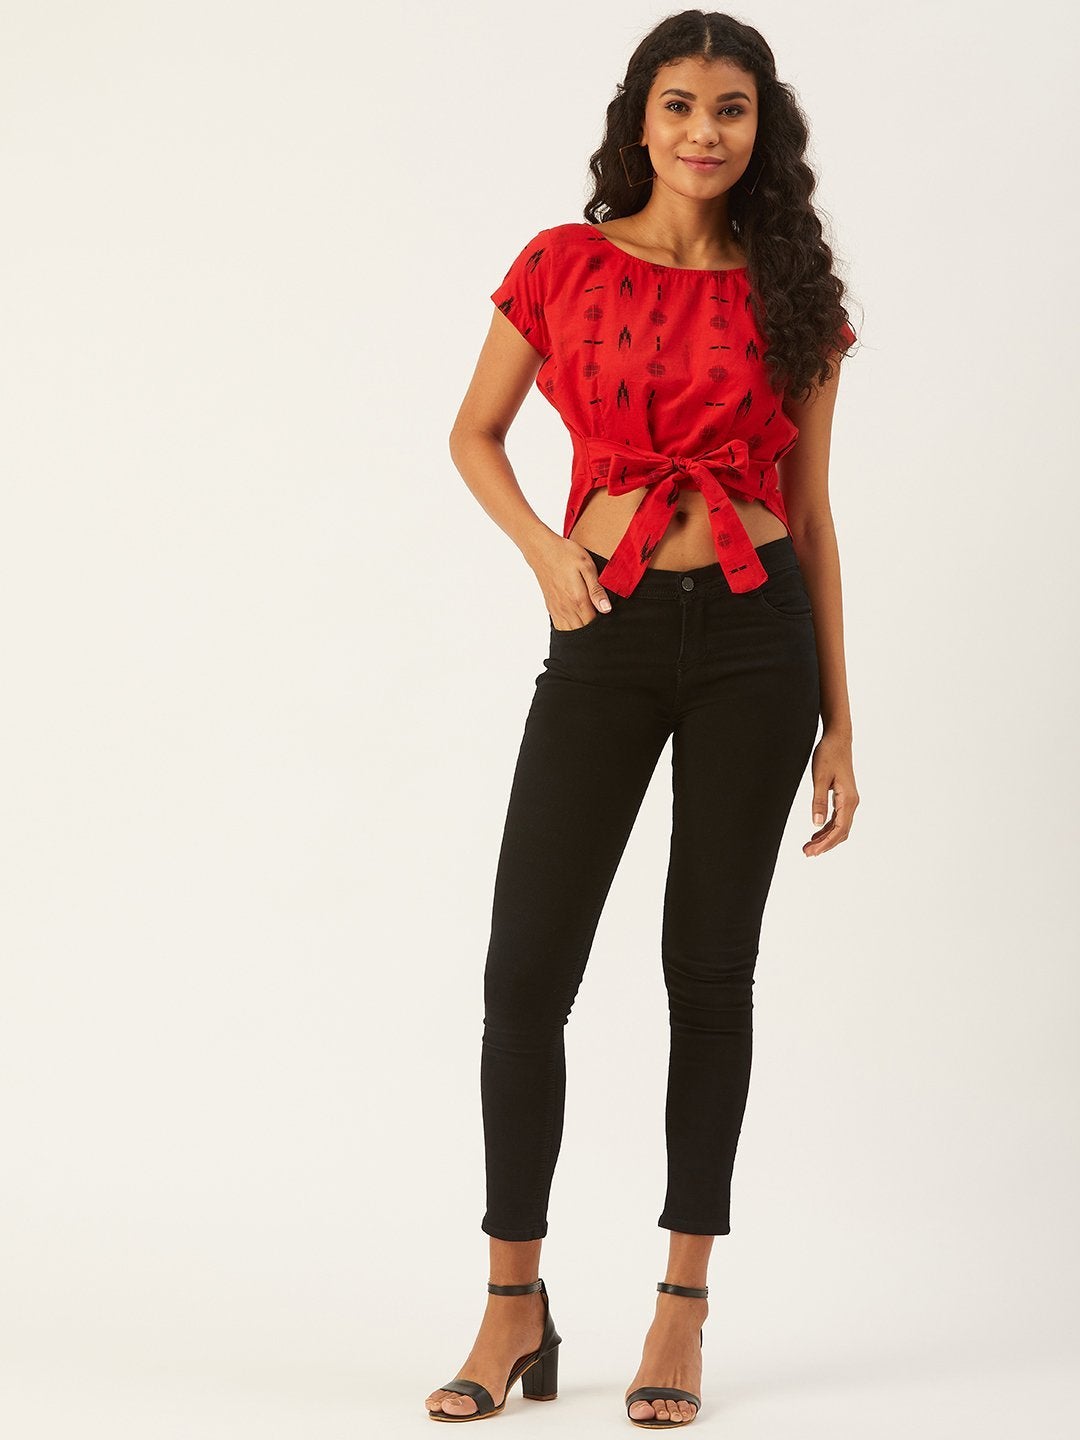 Women's Red Top With Shapes - InWeave